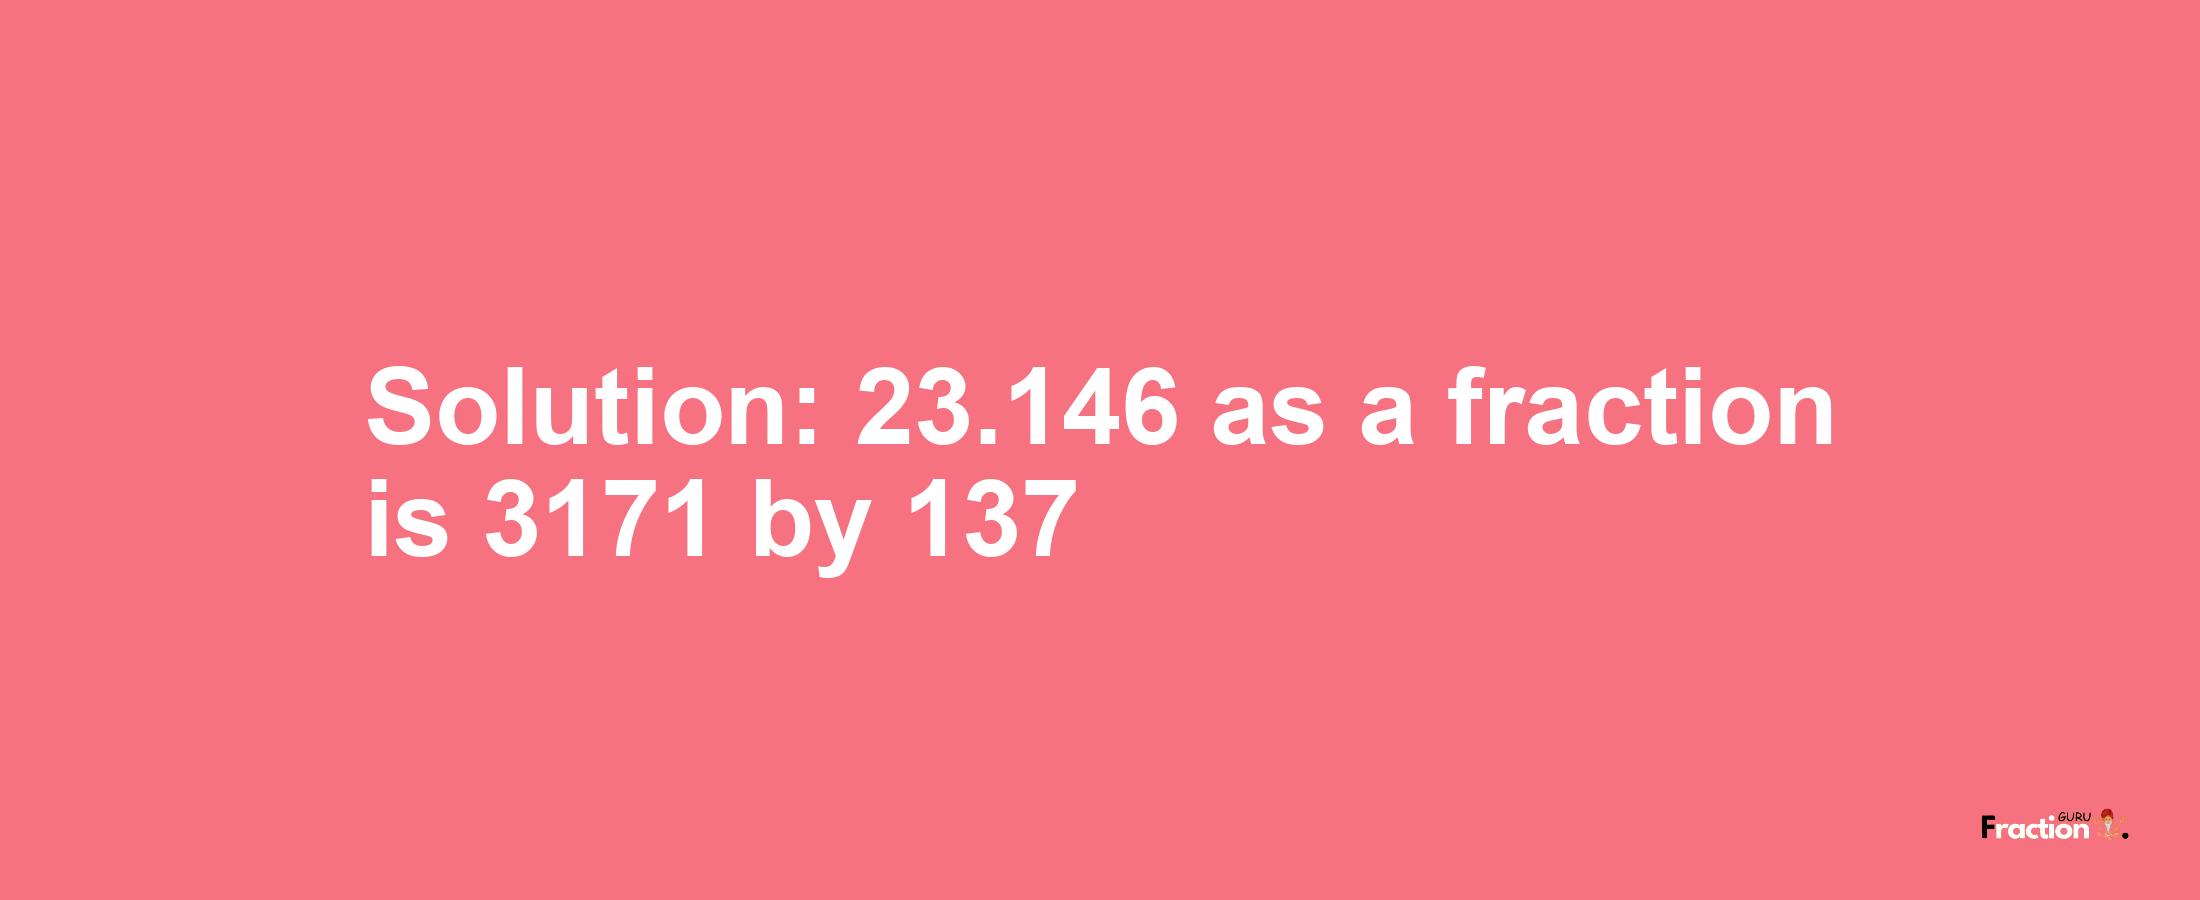 Solution:23.146 as a fraction is 3171/137